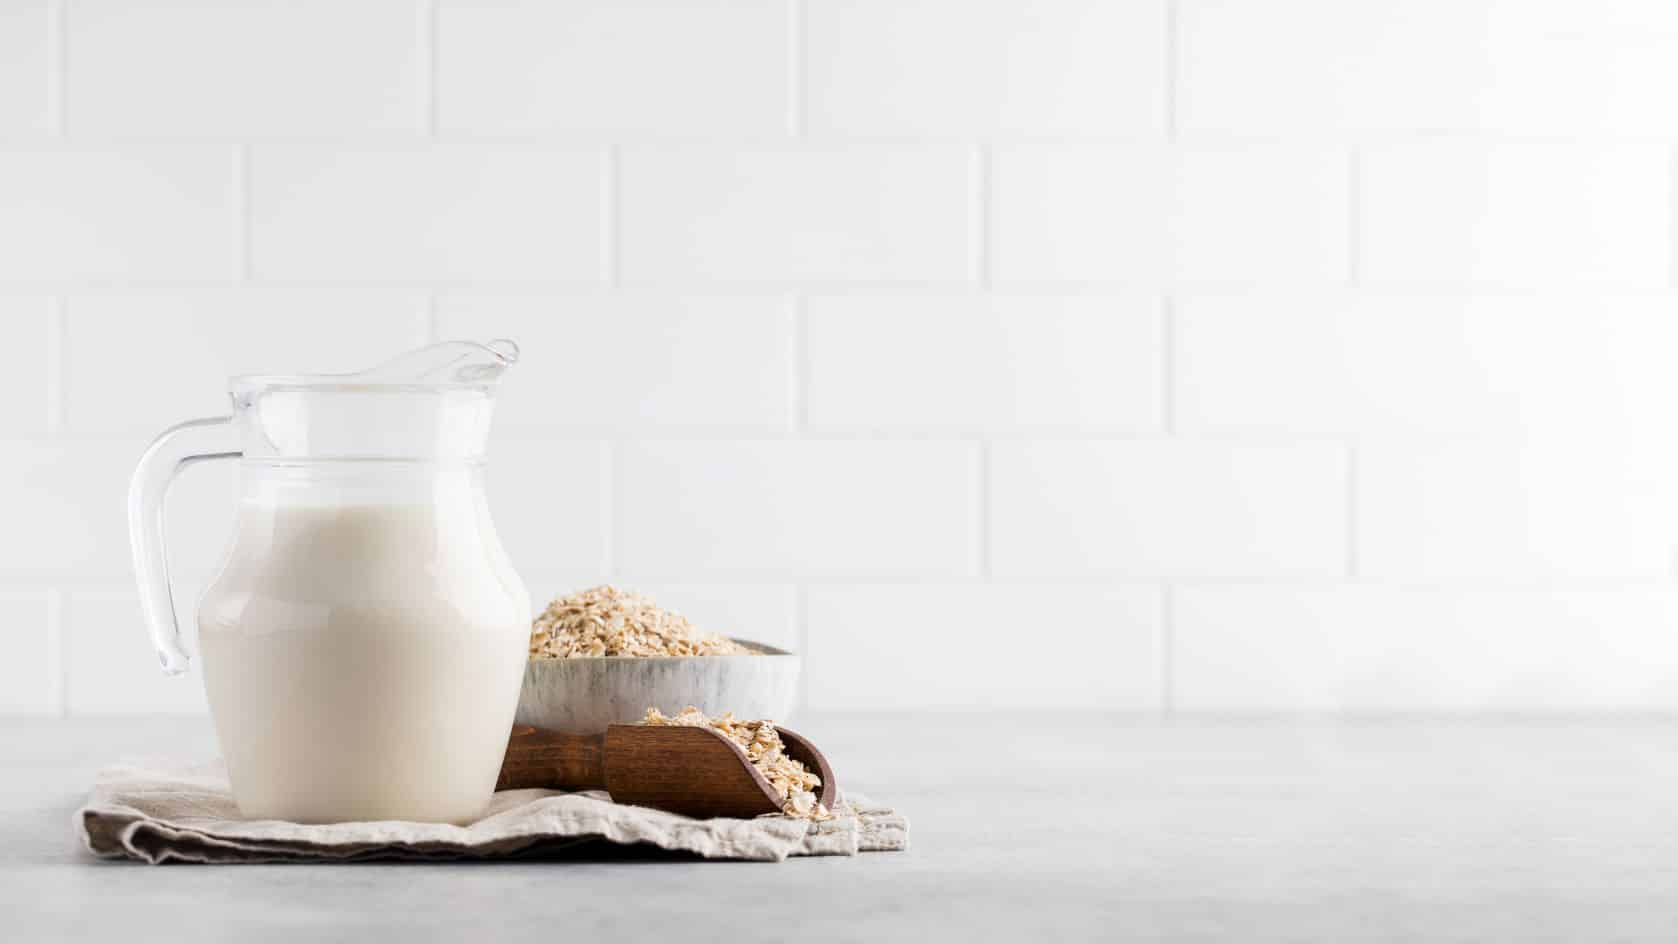 Is Oat Milk Bad for You? The Myths & Facts